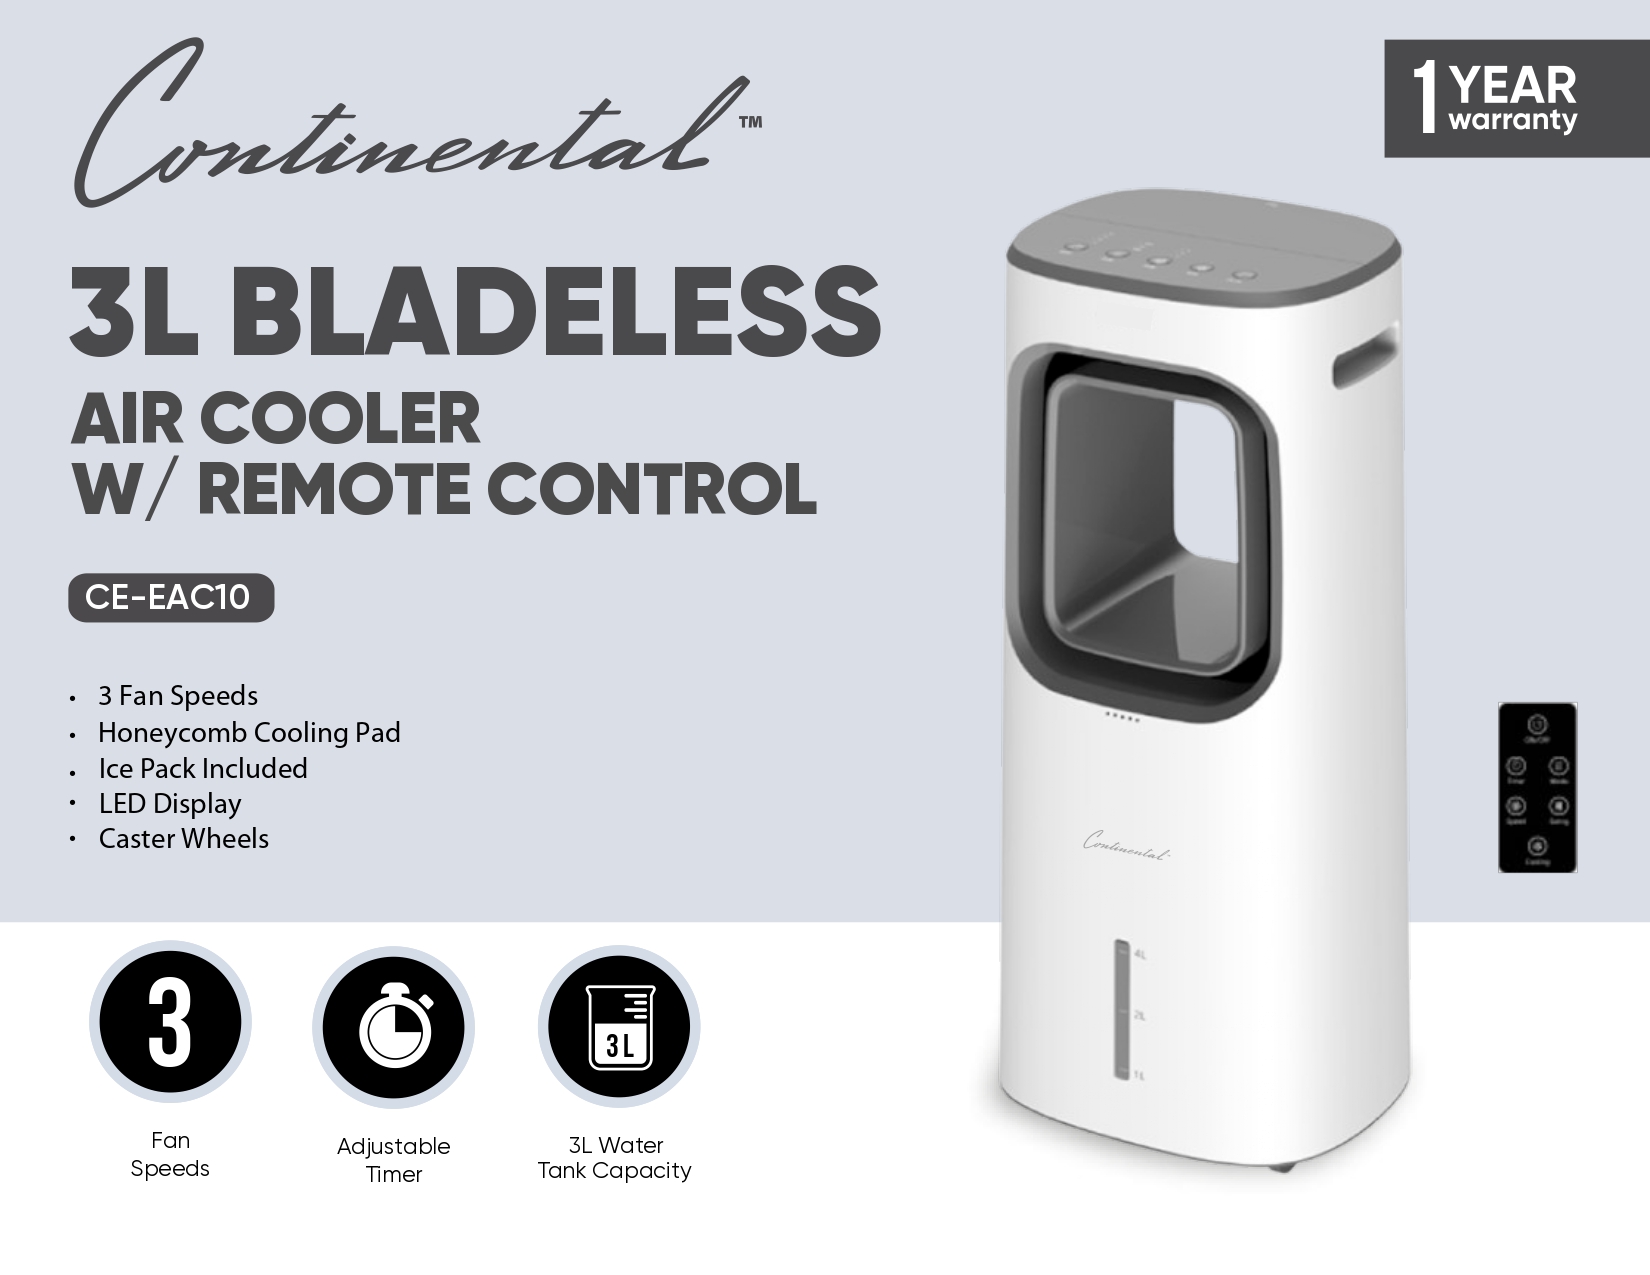 3L BLADELESS AIR COOLER W/ REMOTE CONTROL